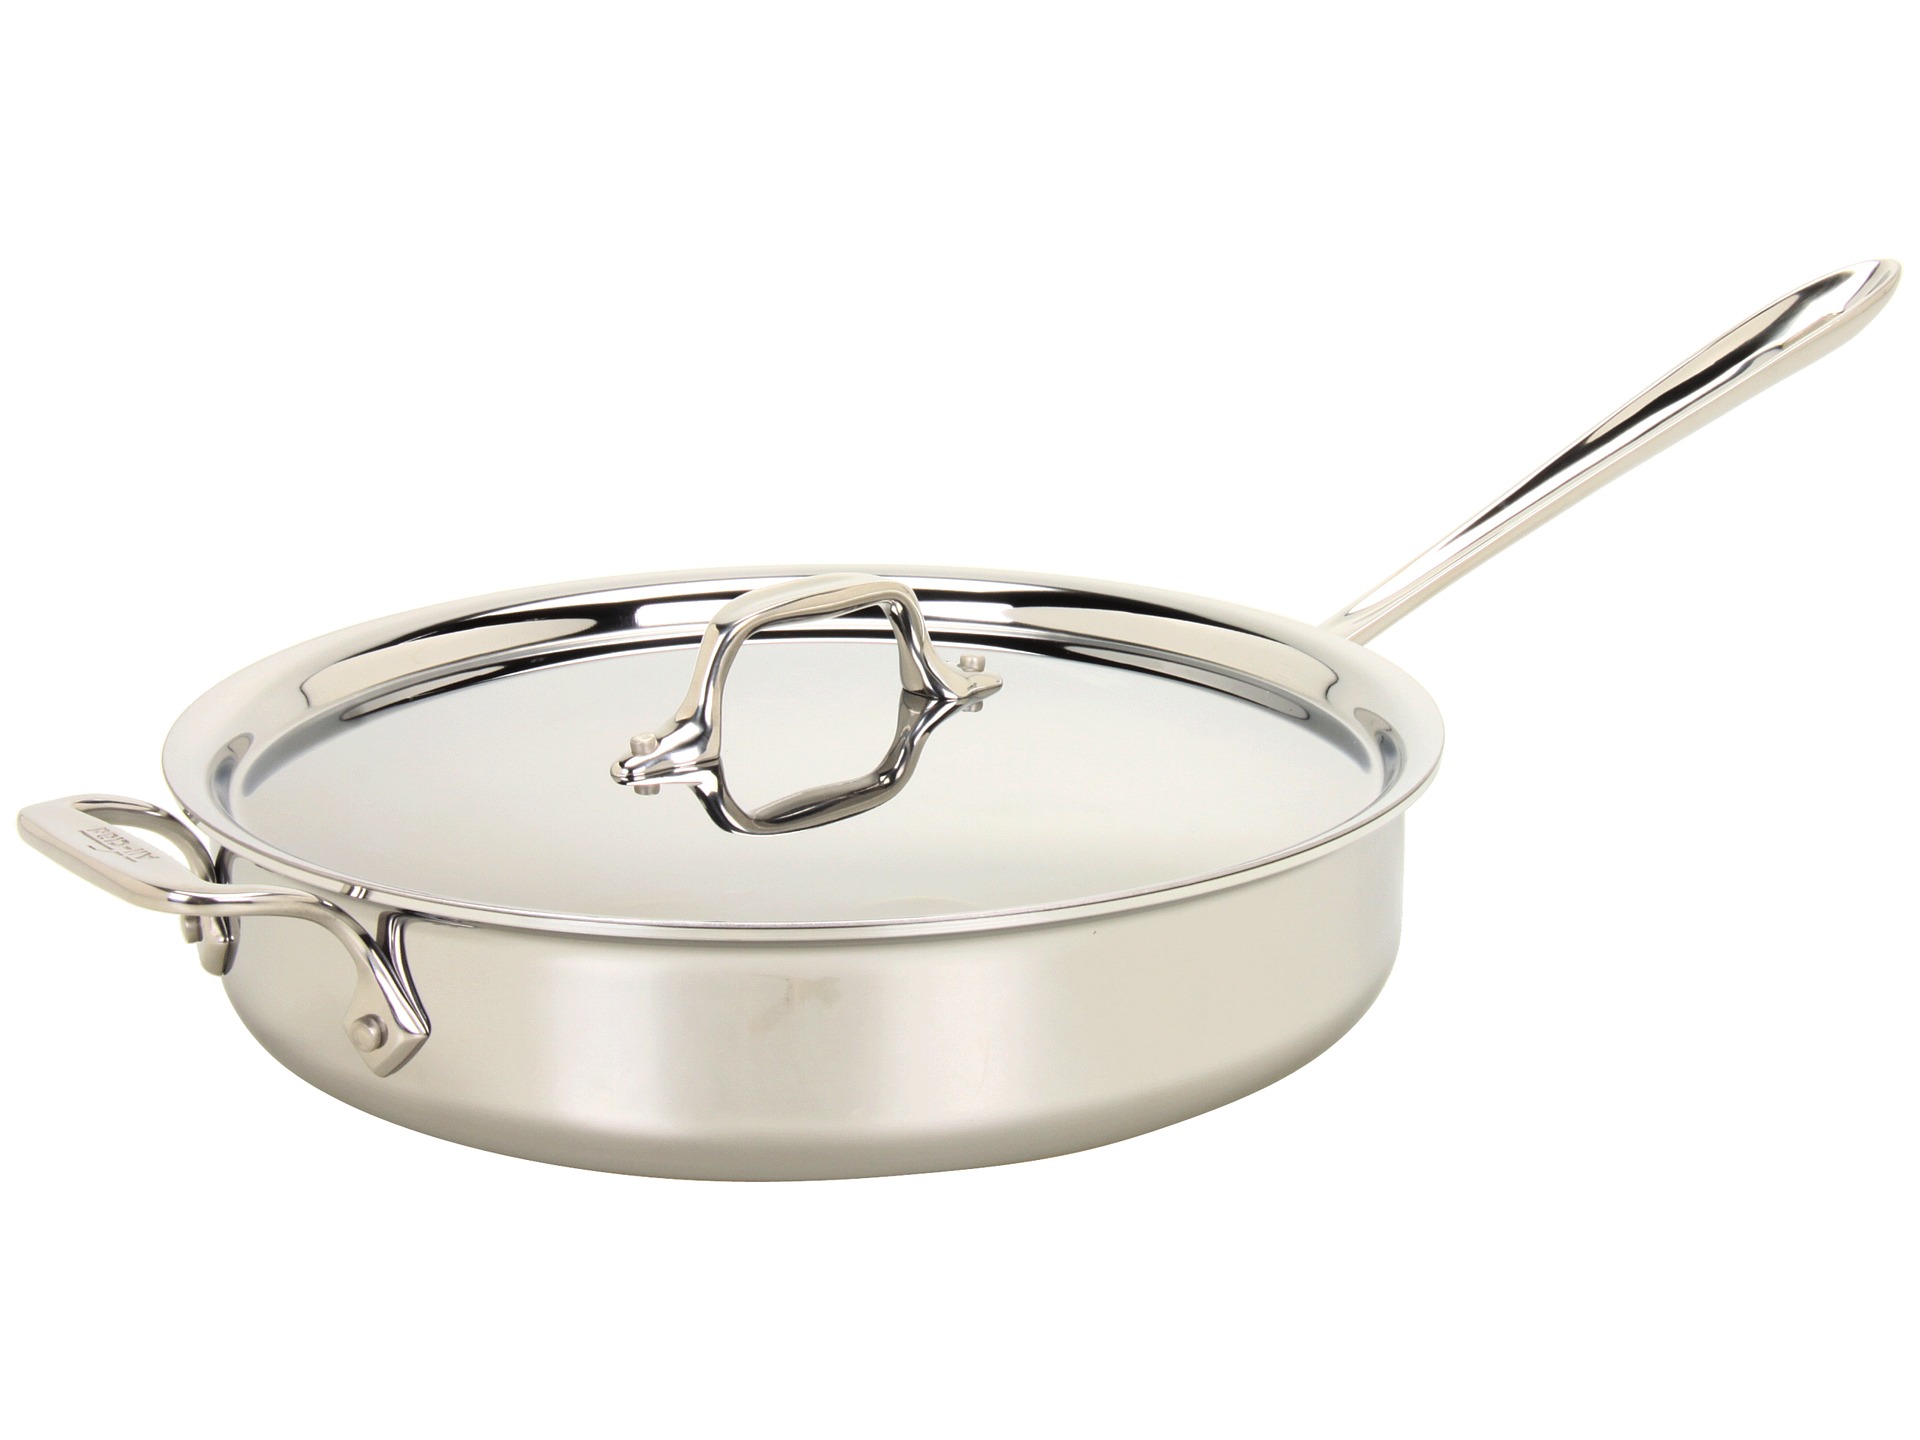 All Clad Stainless Steel 3 Qt Saute Pan With Lid | Shipped Free at Zappos All Clad 3 Qt Stainless Steel Saute Pan With Lid